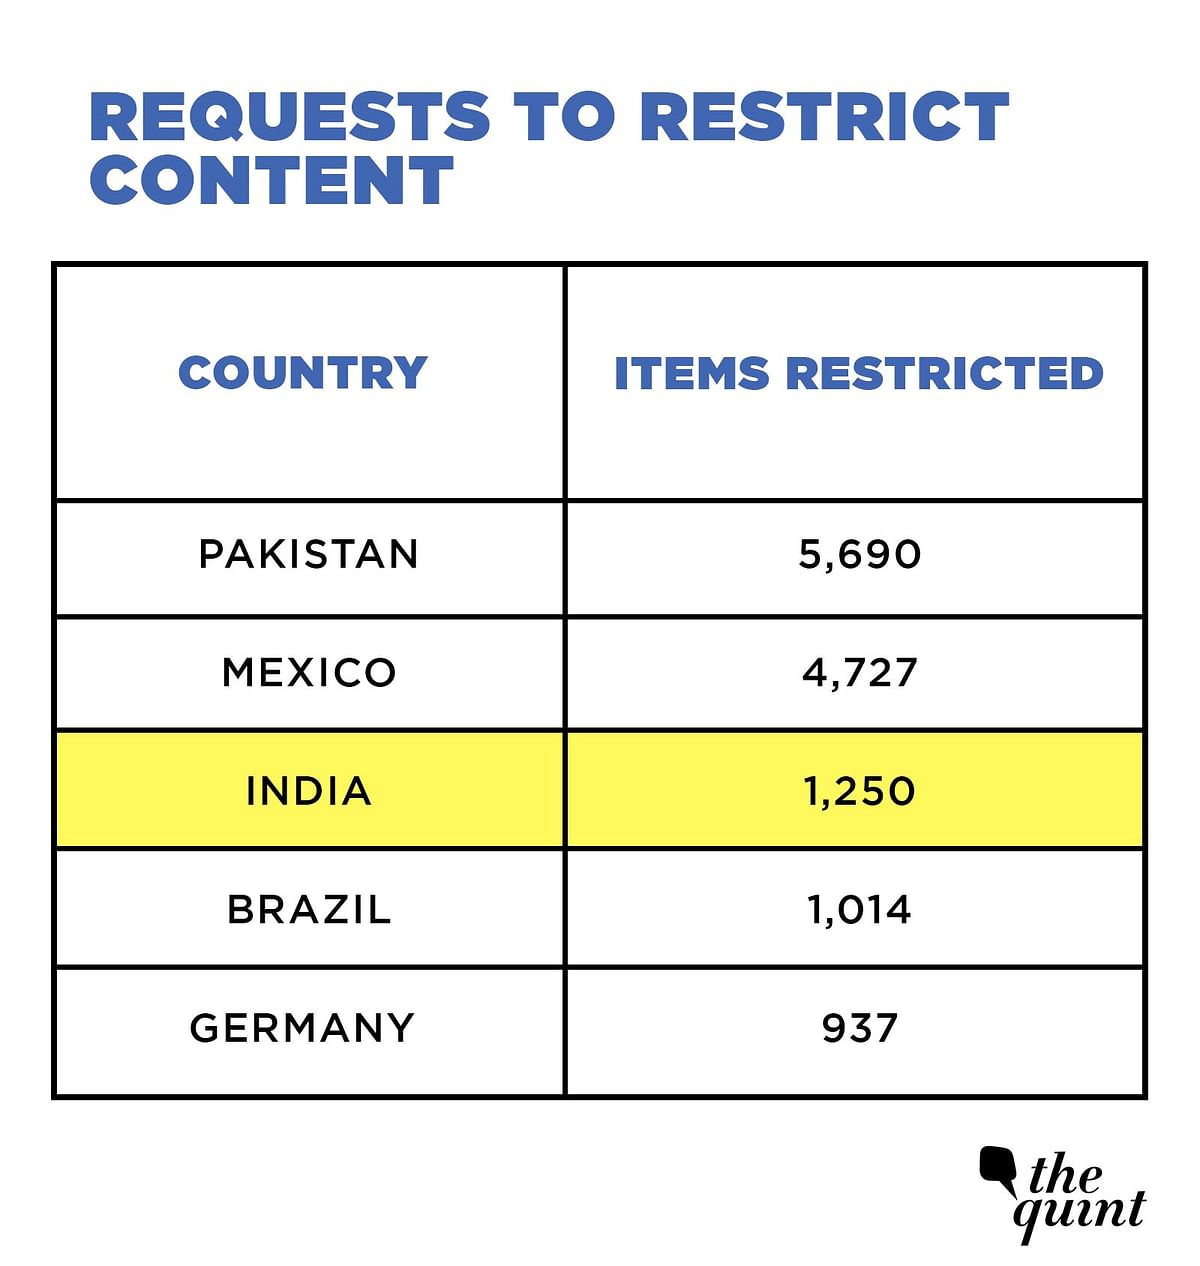 India shut down the internet 40 times between January and July 2019, the highest among all countries. 